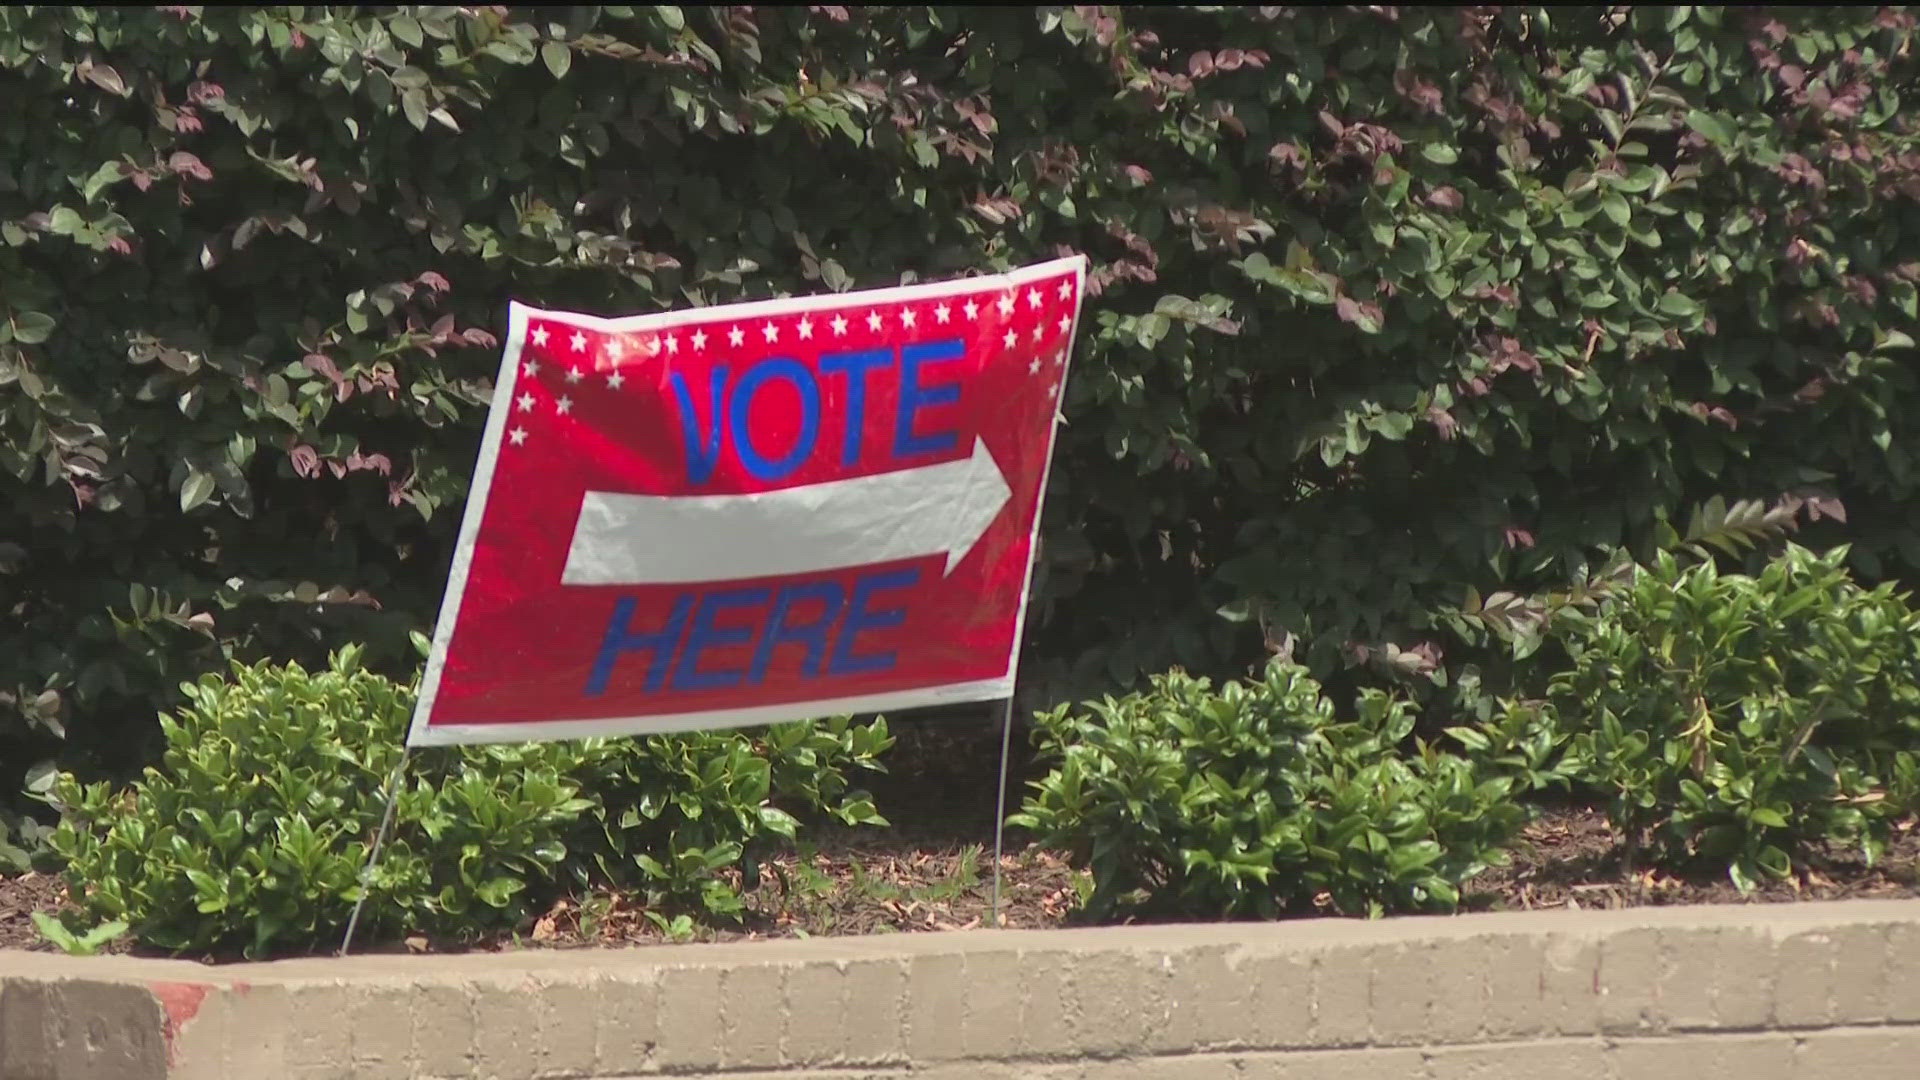 Runoff election turnout is historically low, but Georgia voters who did show up today said it was just as important as any other election day.